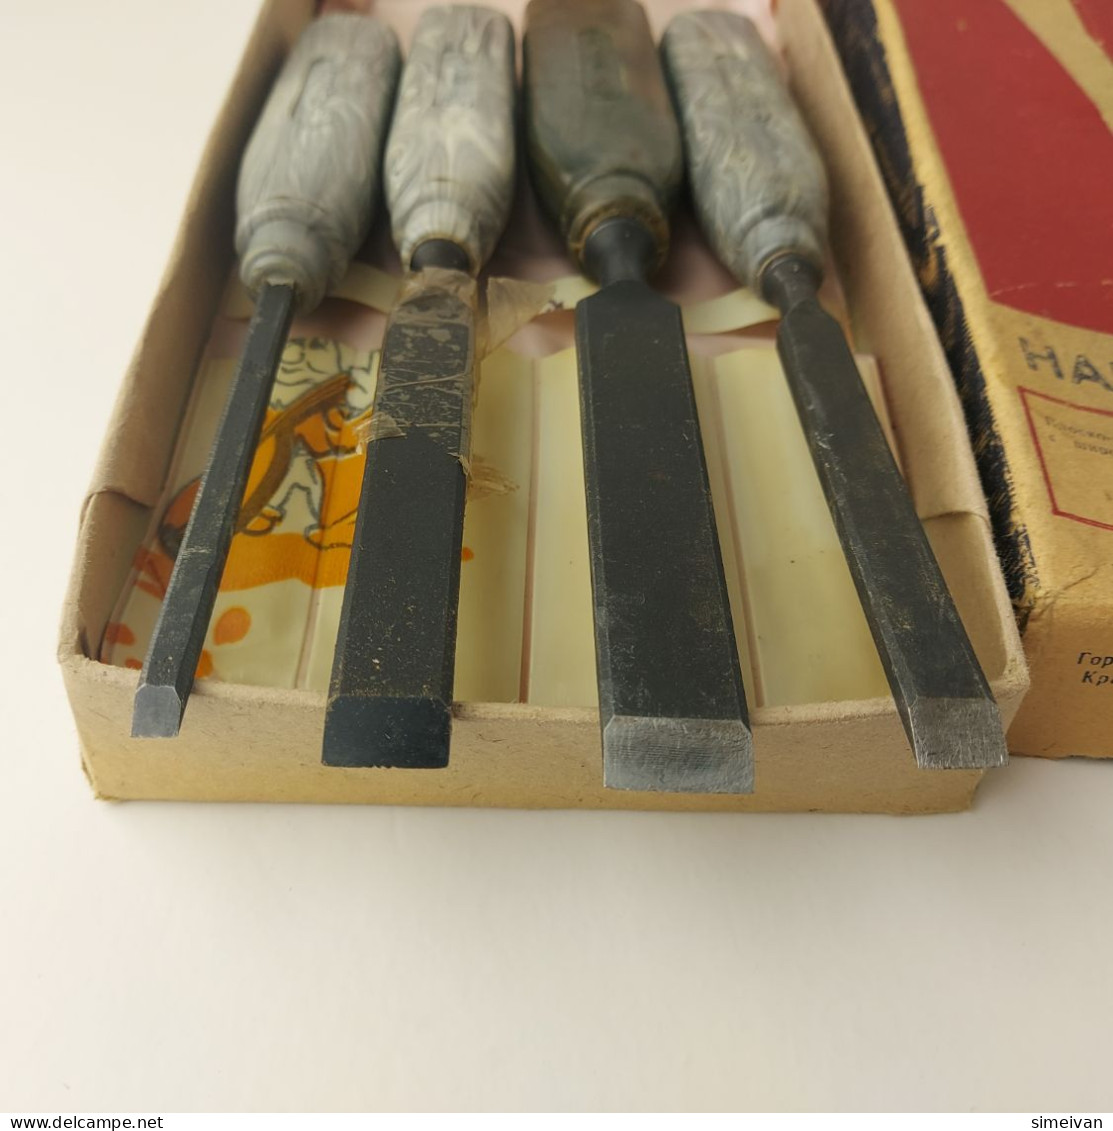 Vintage USSR Chisels For Wood Carving Set Of 4 Soviet Woodworking Tool #5543 - Ancient Tools